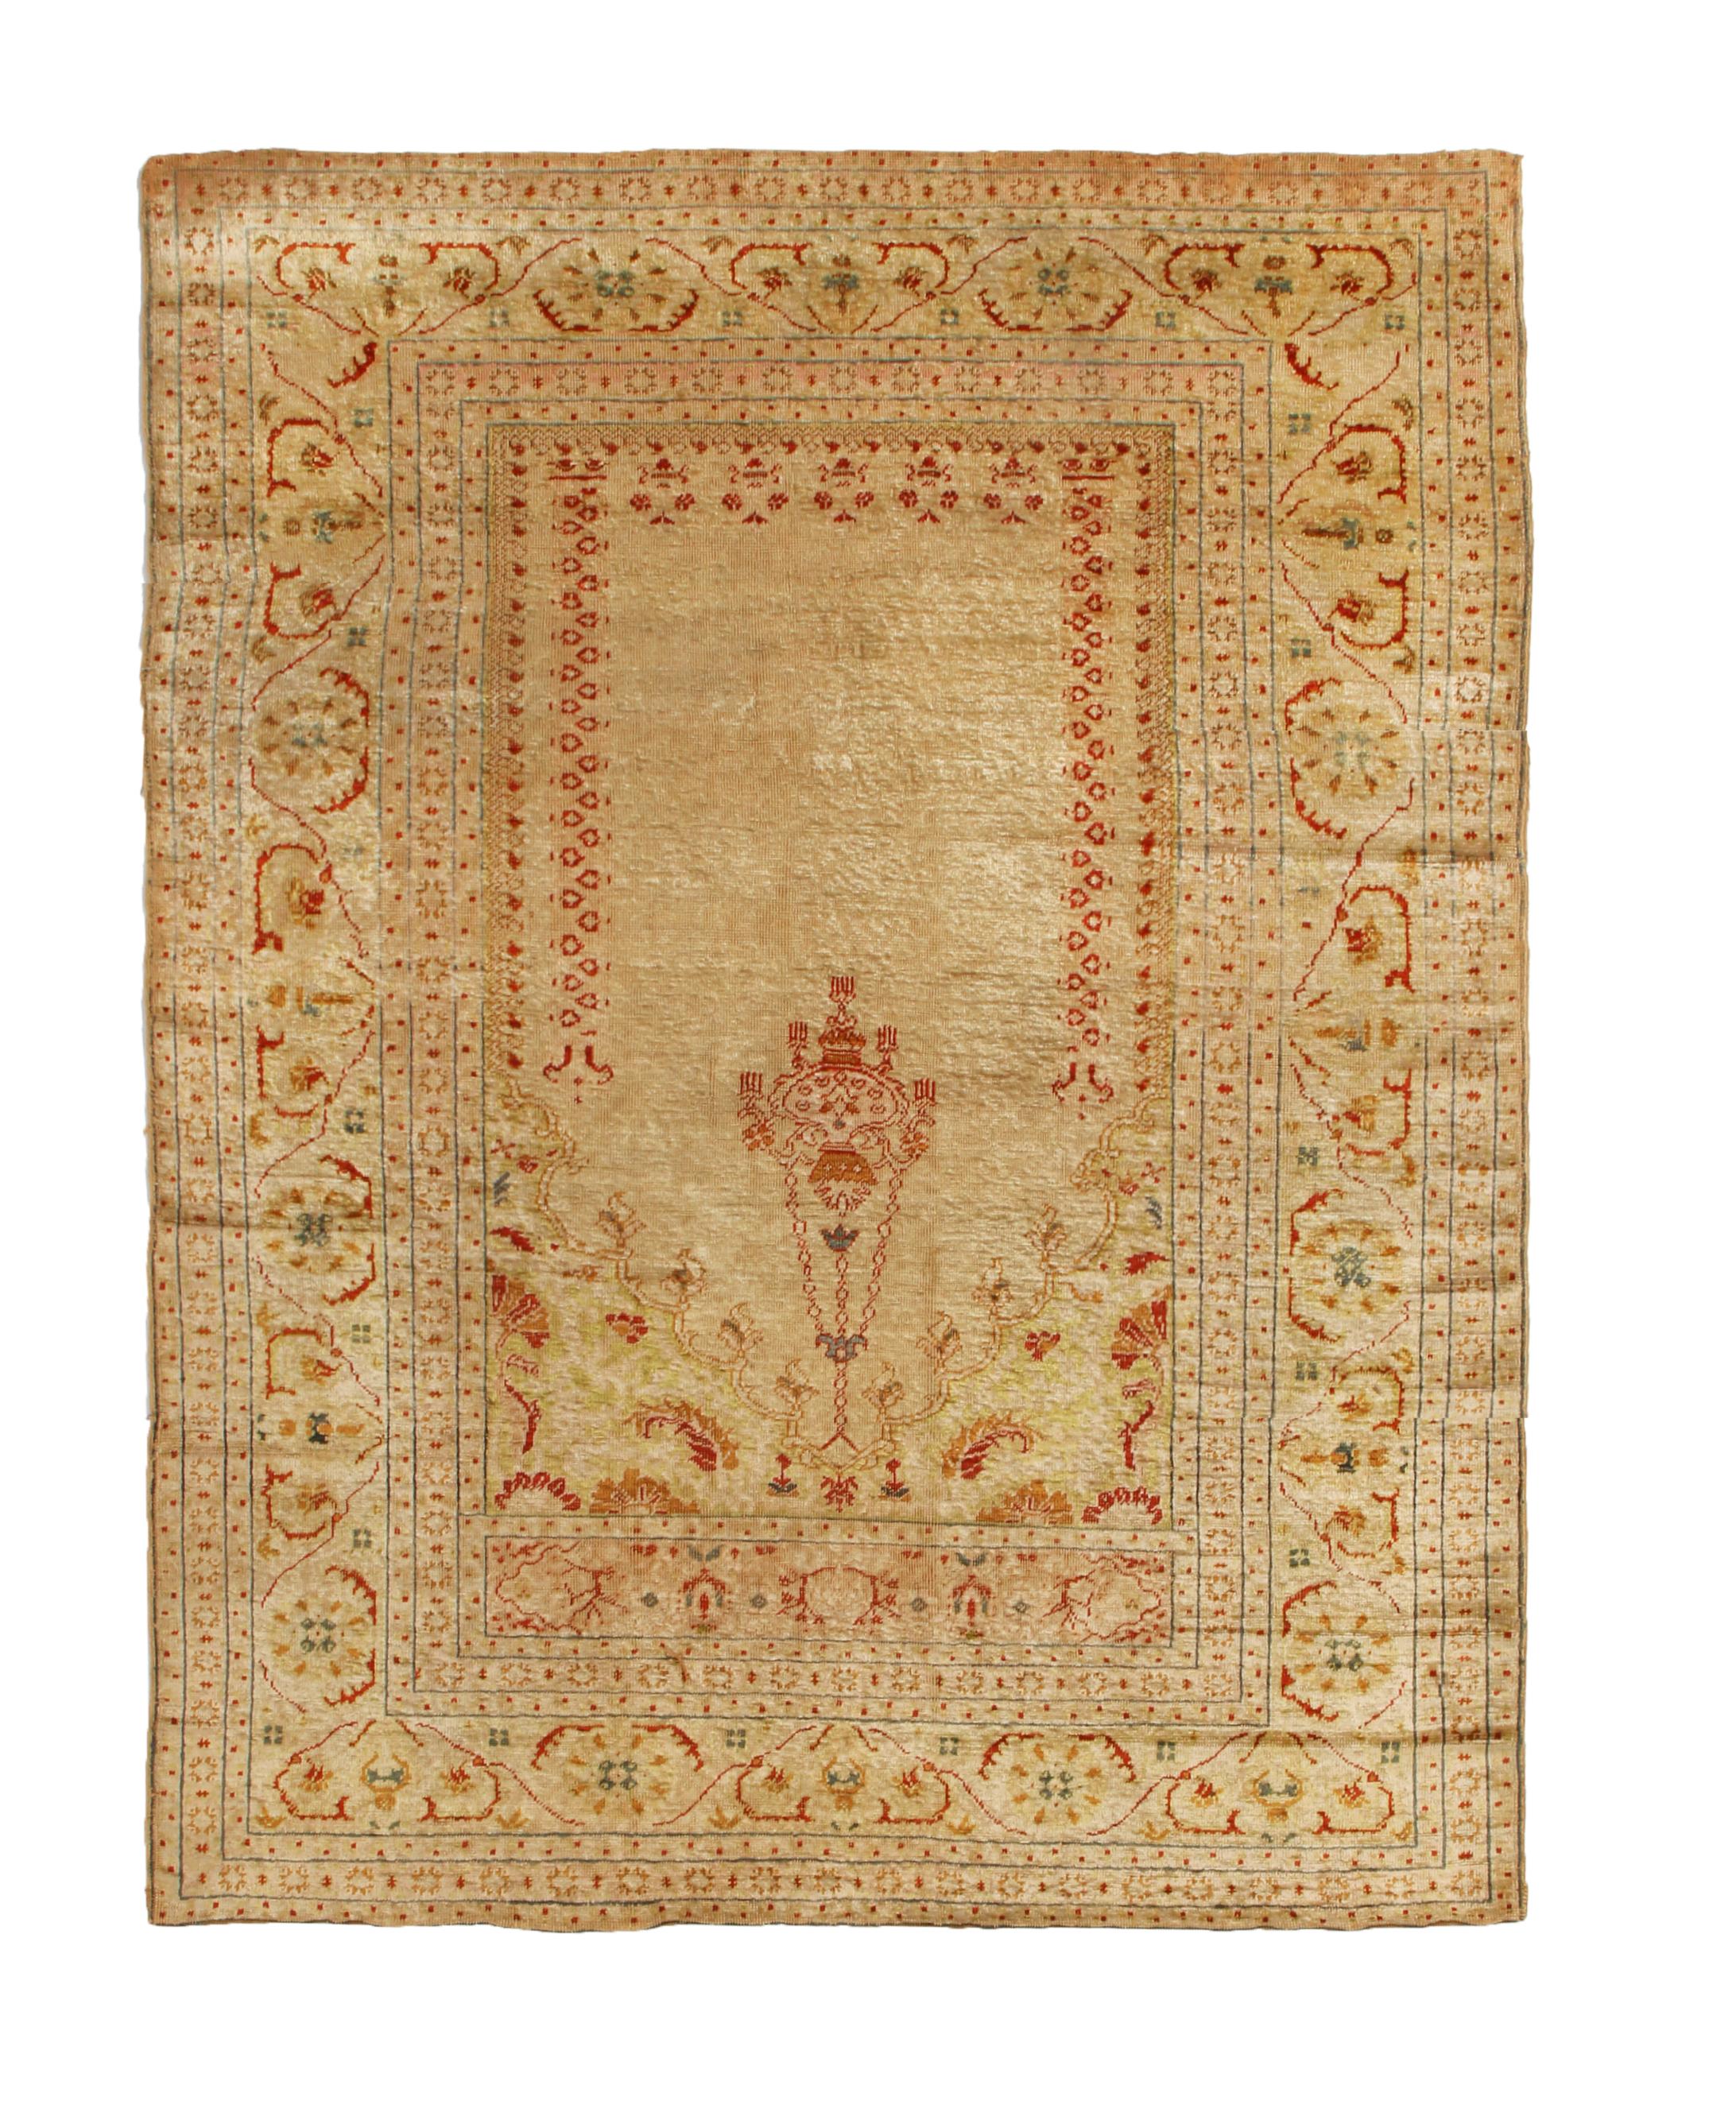 Originating from Persia between 1890-1910, this antique Tabriz rug enjoys a rare, finely hand knotted series of mirrored borders complementary to its combination of versatile beige background with vibrant green and red colourways in the medallion